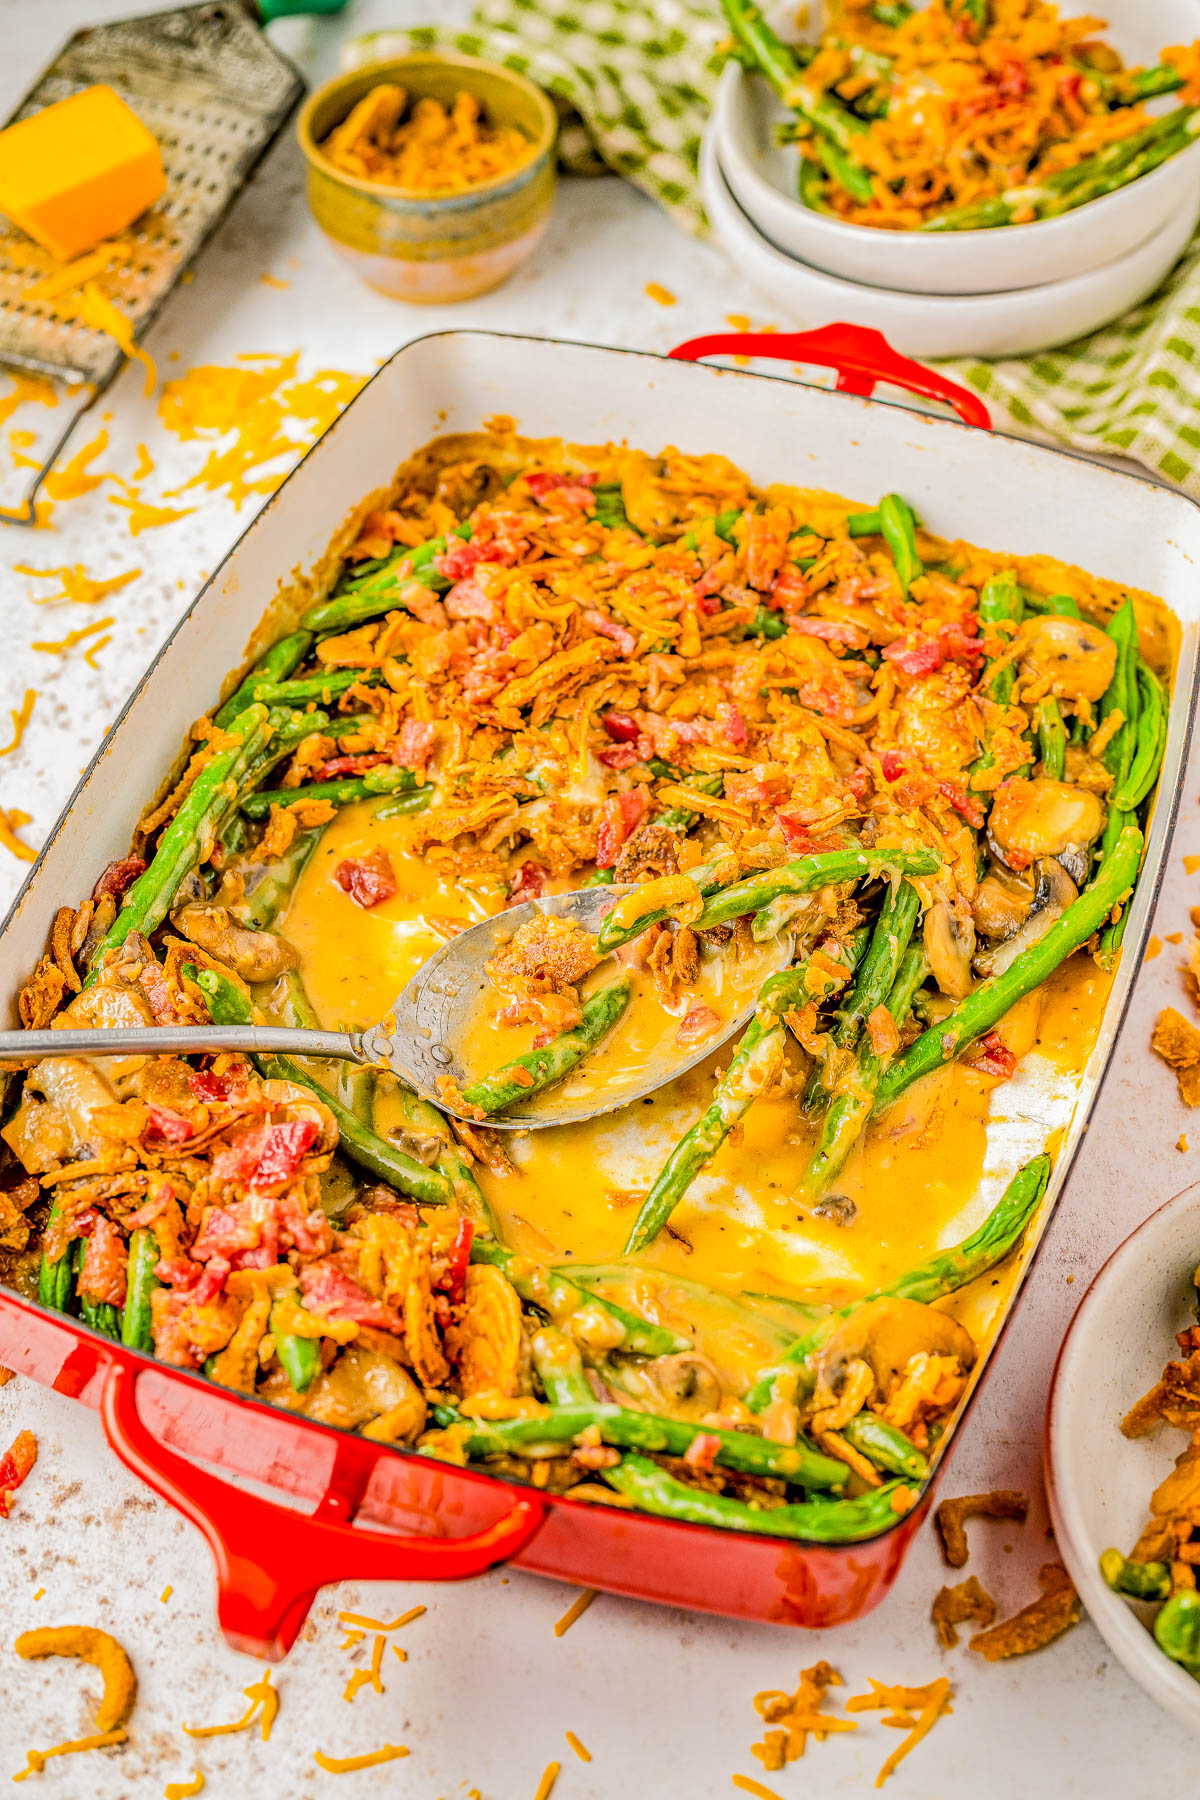 Smothered Bacon Green Bean Casserole — Homemade green bean casserole is made even better with the addition of BACON and CHEESE! Fresh green beans are smothered in a savory mushroom sauce before being topped with cheese, crumbled bacon, and fried onions. A truly decadent, cheesy casserole that’s perfect for Thanksgiving, Christmas, or when you're craving a comfort food side dish - and no canned or condensed soups in sight!